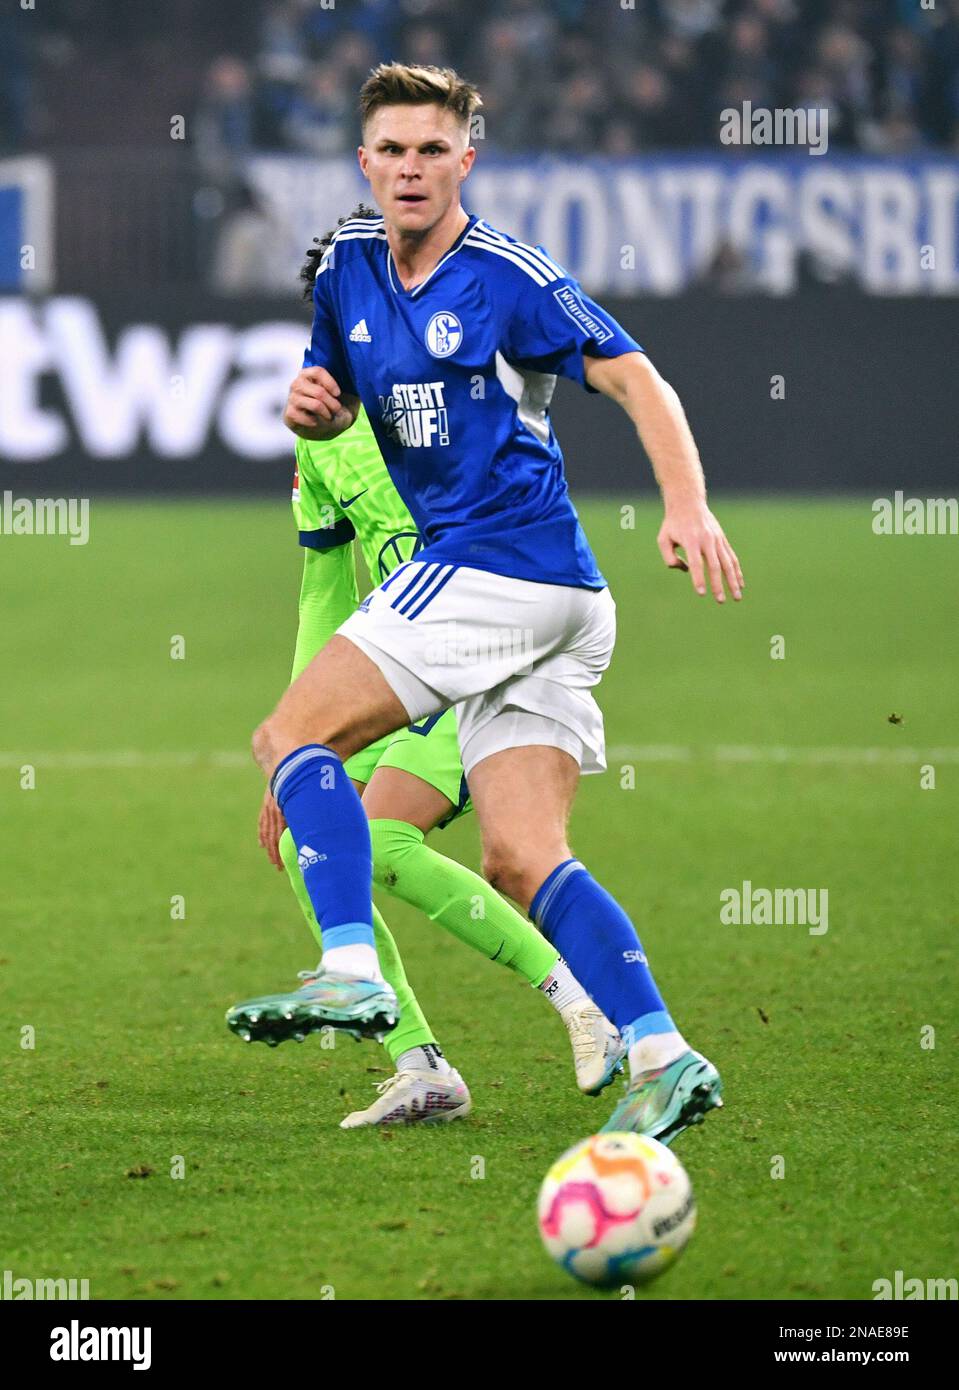 Marius bulter fc schalke 04 hi-res stock photography and images - Alamy